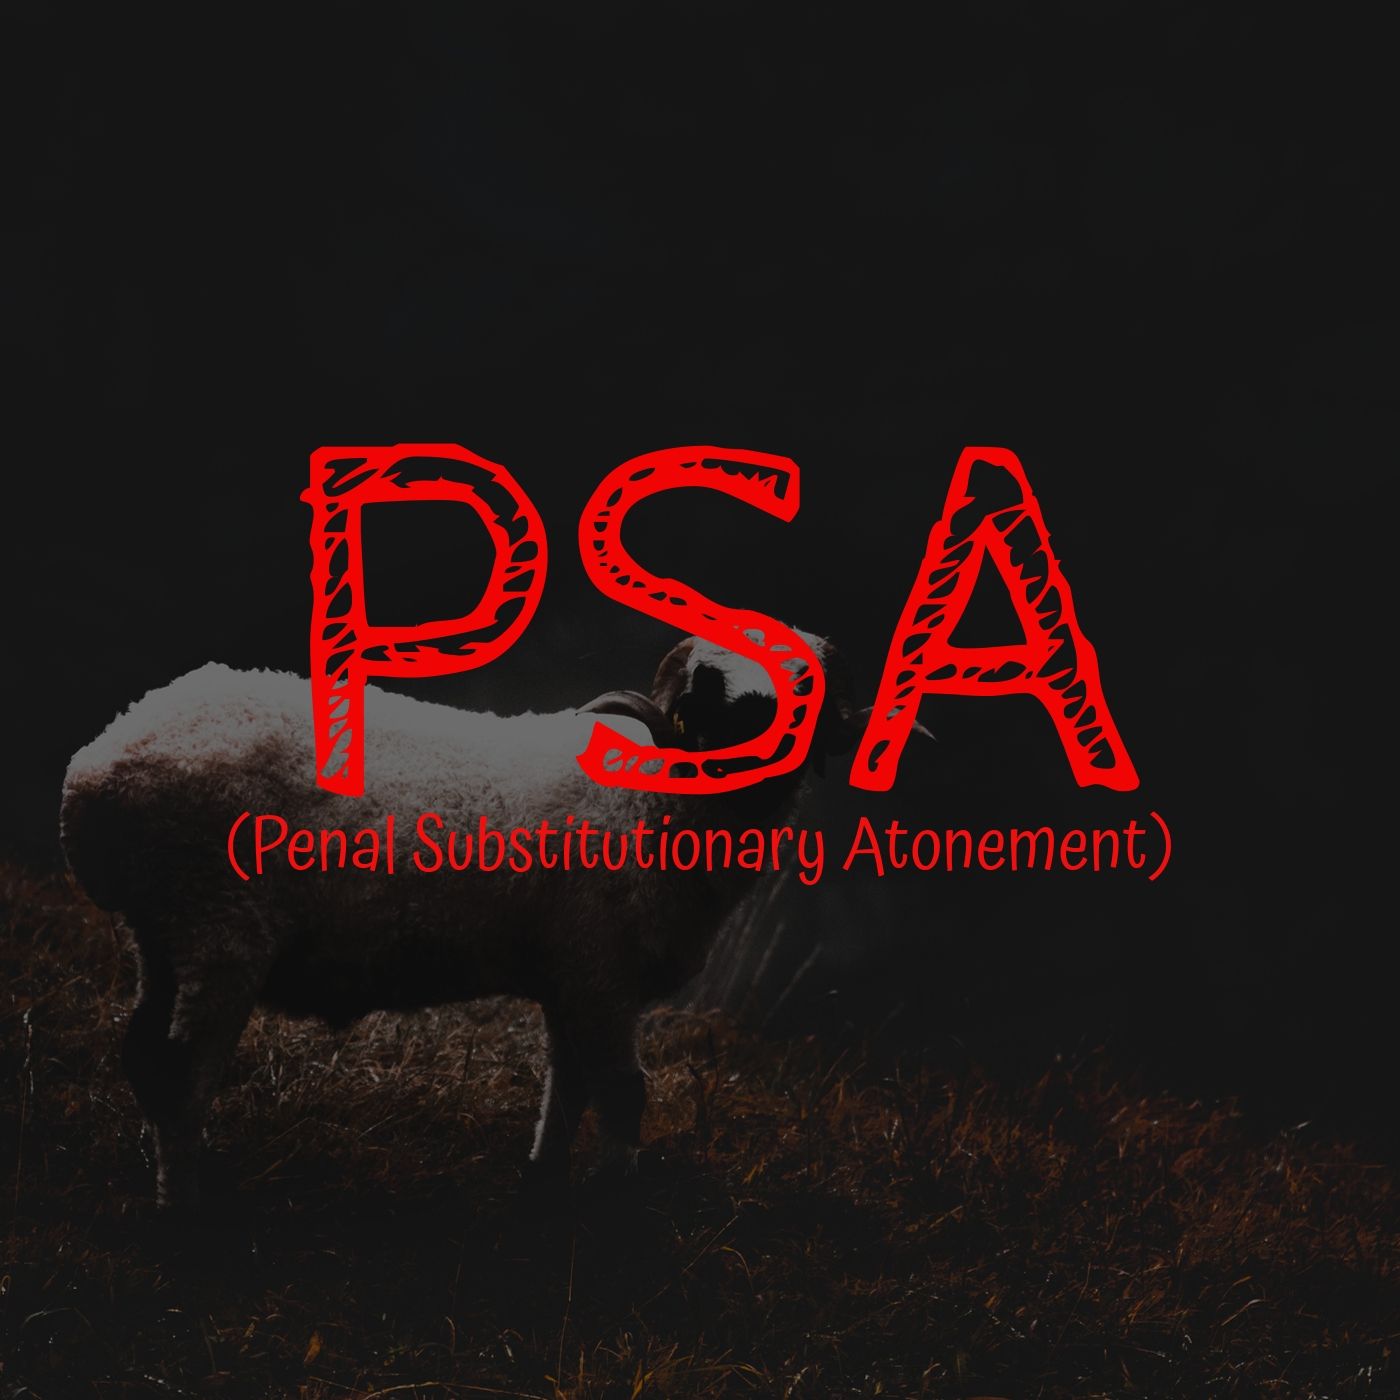 #52 PSA (Penal Substitutionary Atonement)